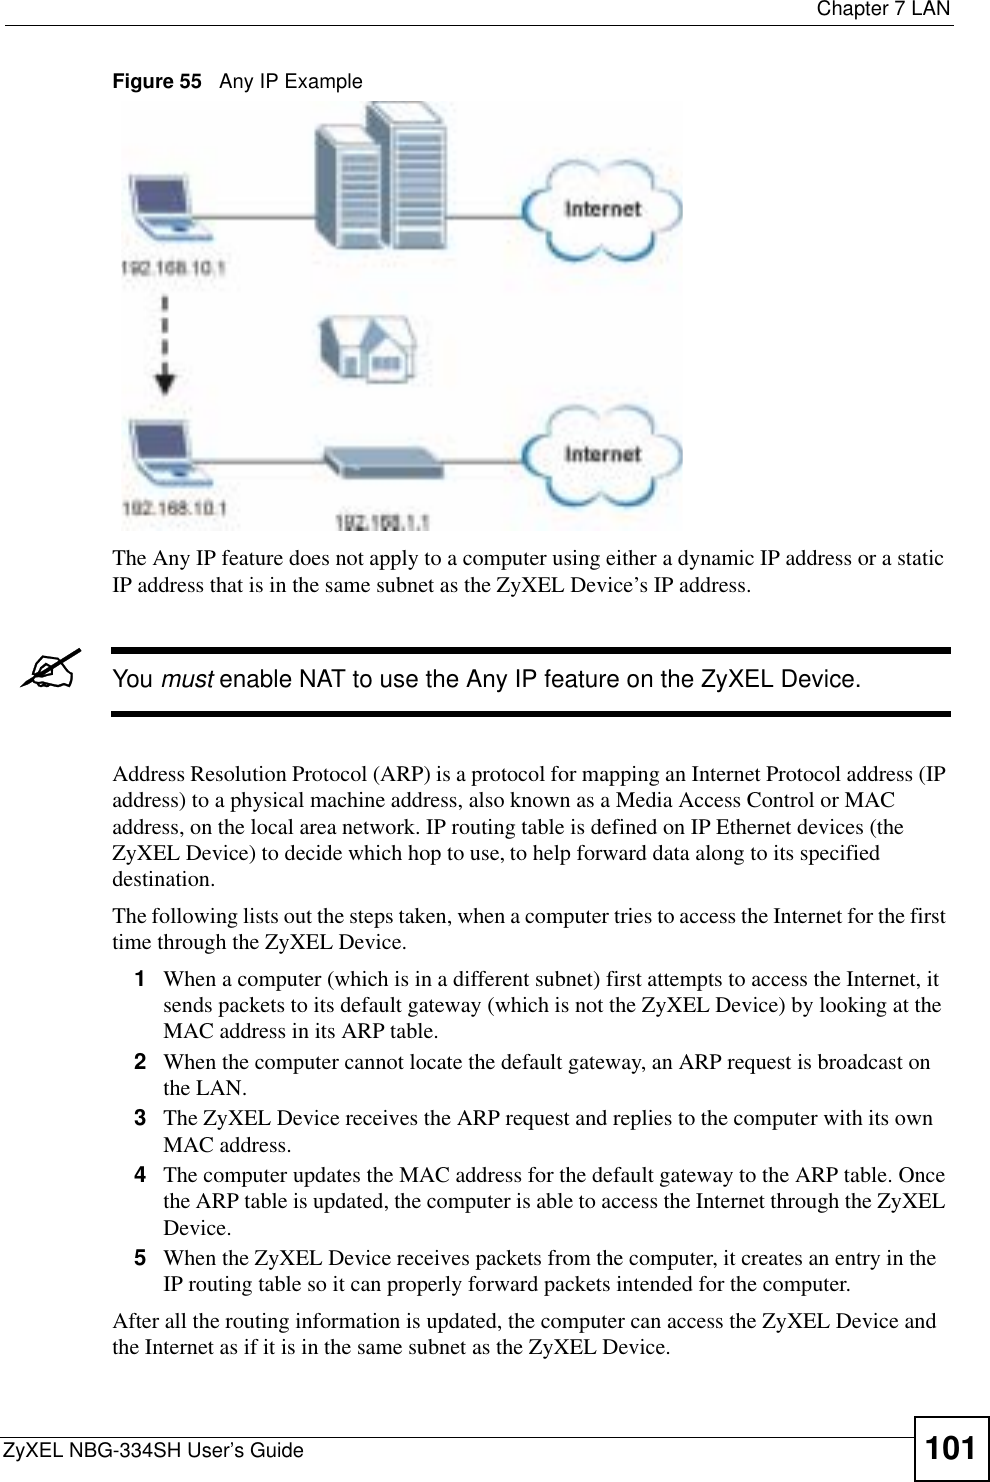  Chapter 7 LANZyXEL NBG-334SH User’s Guide 101Figure 55   Any IP ExampleThe Any IP feature does not apply to a computer using either a dynamic IP address or a static IP address that is in the same subnet as the ZyXEL Device’s IP address.&quot;You must enable NAT to use the Any IP feature on the ZyXEL Device. Address Resolution Protocol (ARP) is a protocol for mapping an Internet Protocol address (IP address) to a physical machine address, also known as a Media Access Control or MAC address, on the local area network. IP routing table is defined on IP Ethernet devices (the ZyXEL Device) to decide which hop to use, to help forward data along to its specified destination.The following lists out the steps taken, when a computer tries to access the Internet for the first time through the ZyXEL Device.1When a computer (which is in a different subnet) first attempts to access the Internet, it sends packets to its default gateway (which is not the ZyXEL Device) by looking at the MAC address in its ARP table. 2When the computer cannot locate the default gateway, an ARP request is broadcast on the LAN. 3The ZyXEL Device receives the ARP request and replies to the computer with its own MAC address. 4The computer updates the MAC address for the default gateway to the ARP table. Once the ARP table is updated, the computer is able to access the Internet through the ZyXEL Device.5When the ZyXEL Device receives packets from the computer, it creates an entry in the IP routing table so it can properly forward packets intended for the computer. After all the routing information is updated, the computer can access the ZyXEL Device and the Internet as if it is in the same subnet as the ZyXEL Device. 